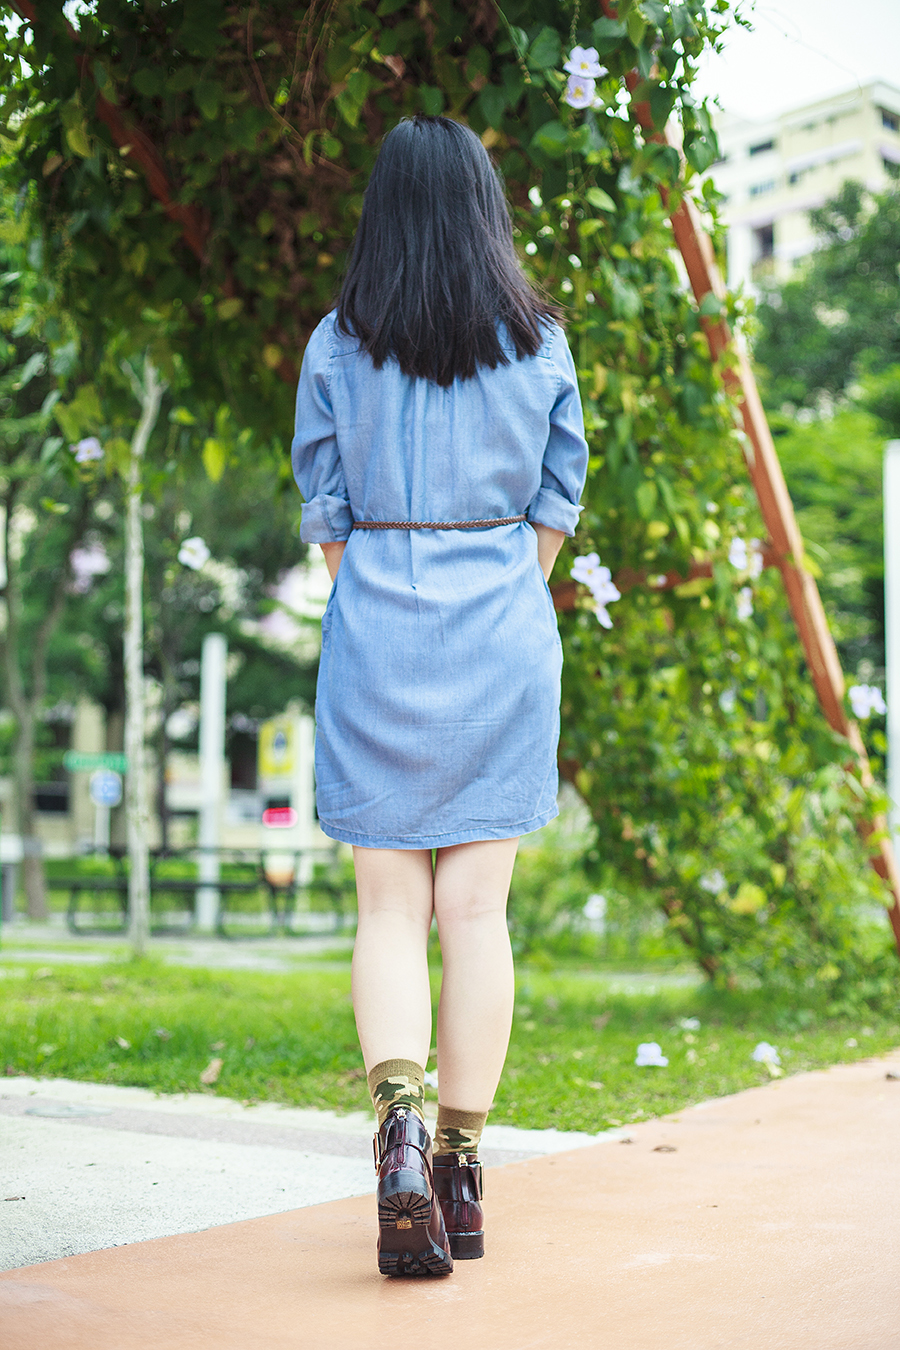 Back view: Uniqlo denim long-sleeved dress, brown braid thin belt, Gap black frame glasses, Stance green camouflage socks, Jeffrey Campbell Flamel cutout booties in wine.